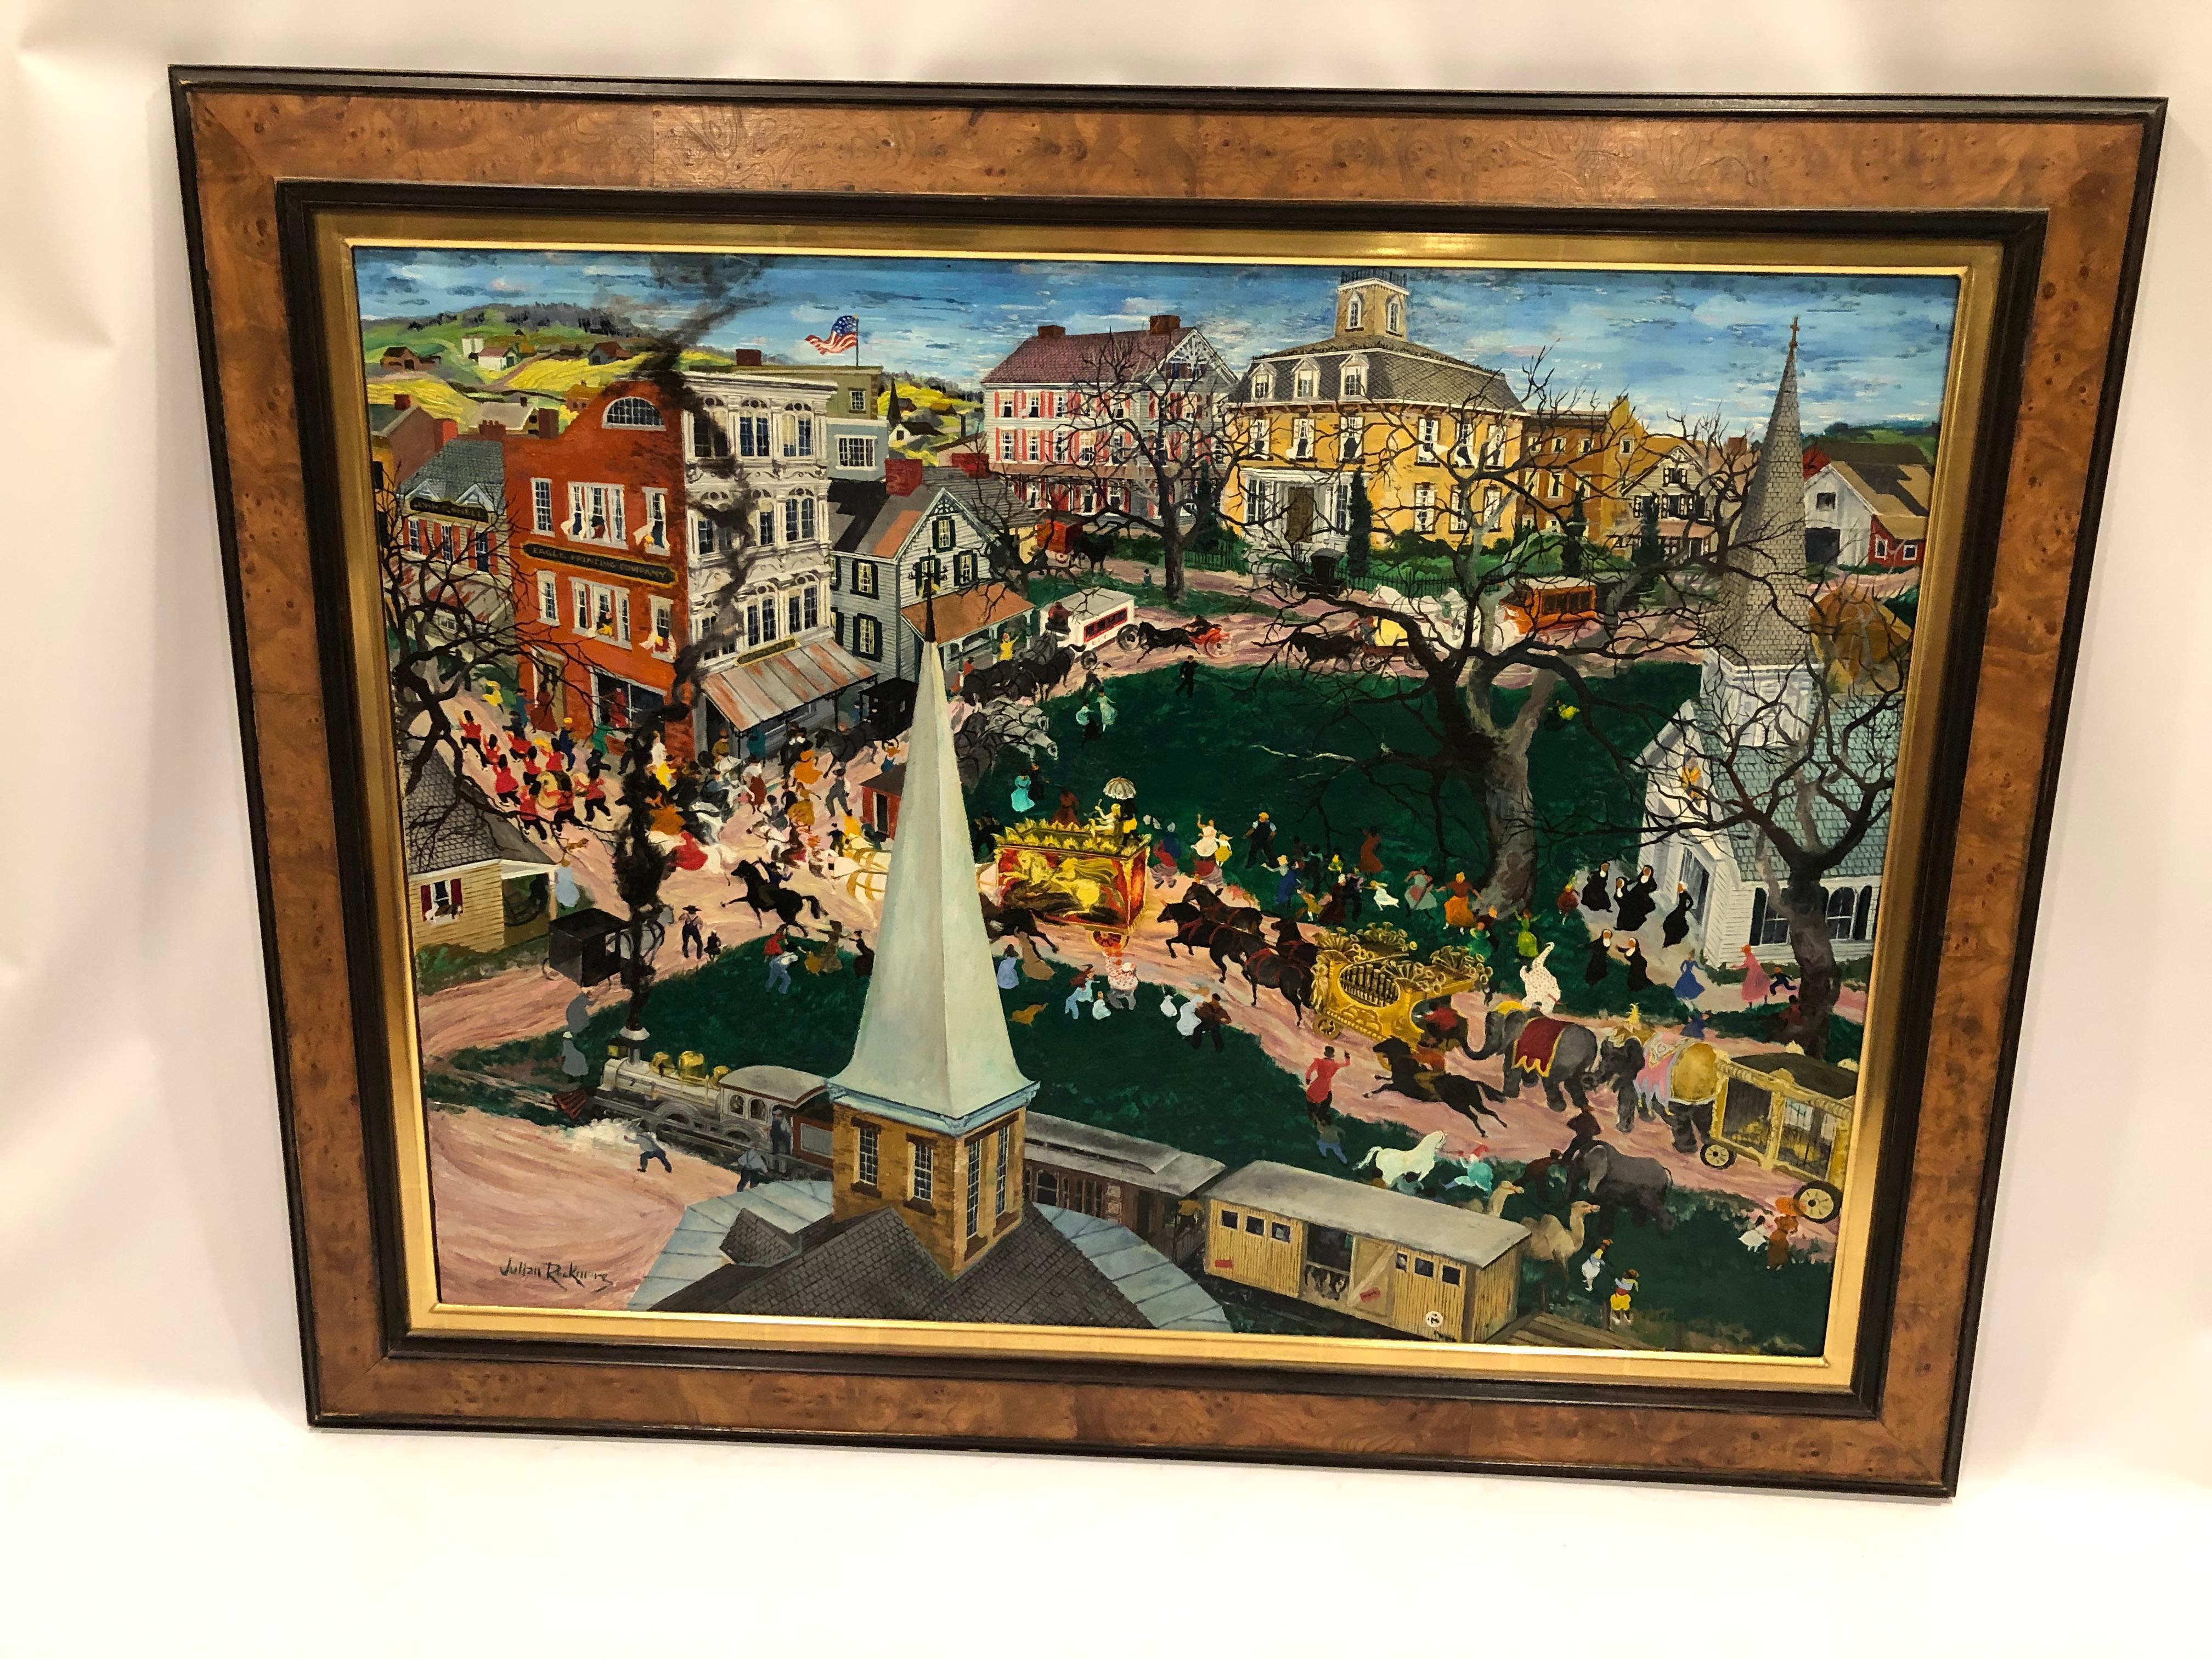 Incredibly detailed whimsical large canvas of a circus coming to an old American town, by artist Jullian Rockmore, signed lower left. Rockmore came from a family of artists and his work is very collectible. The style is faux naive, with a nod to